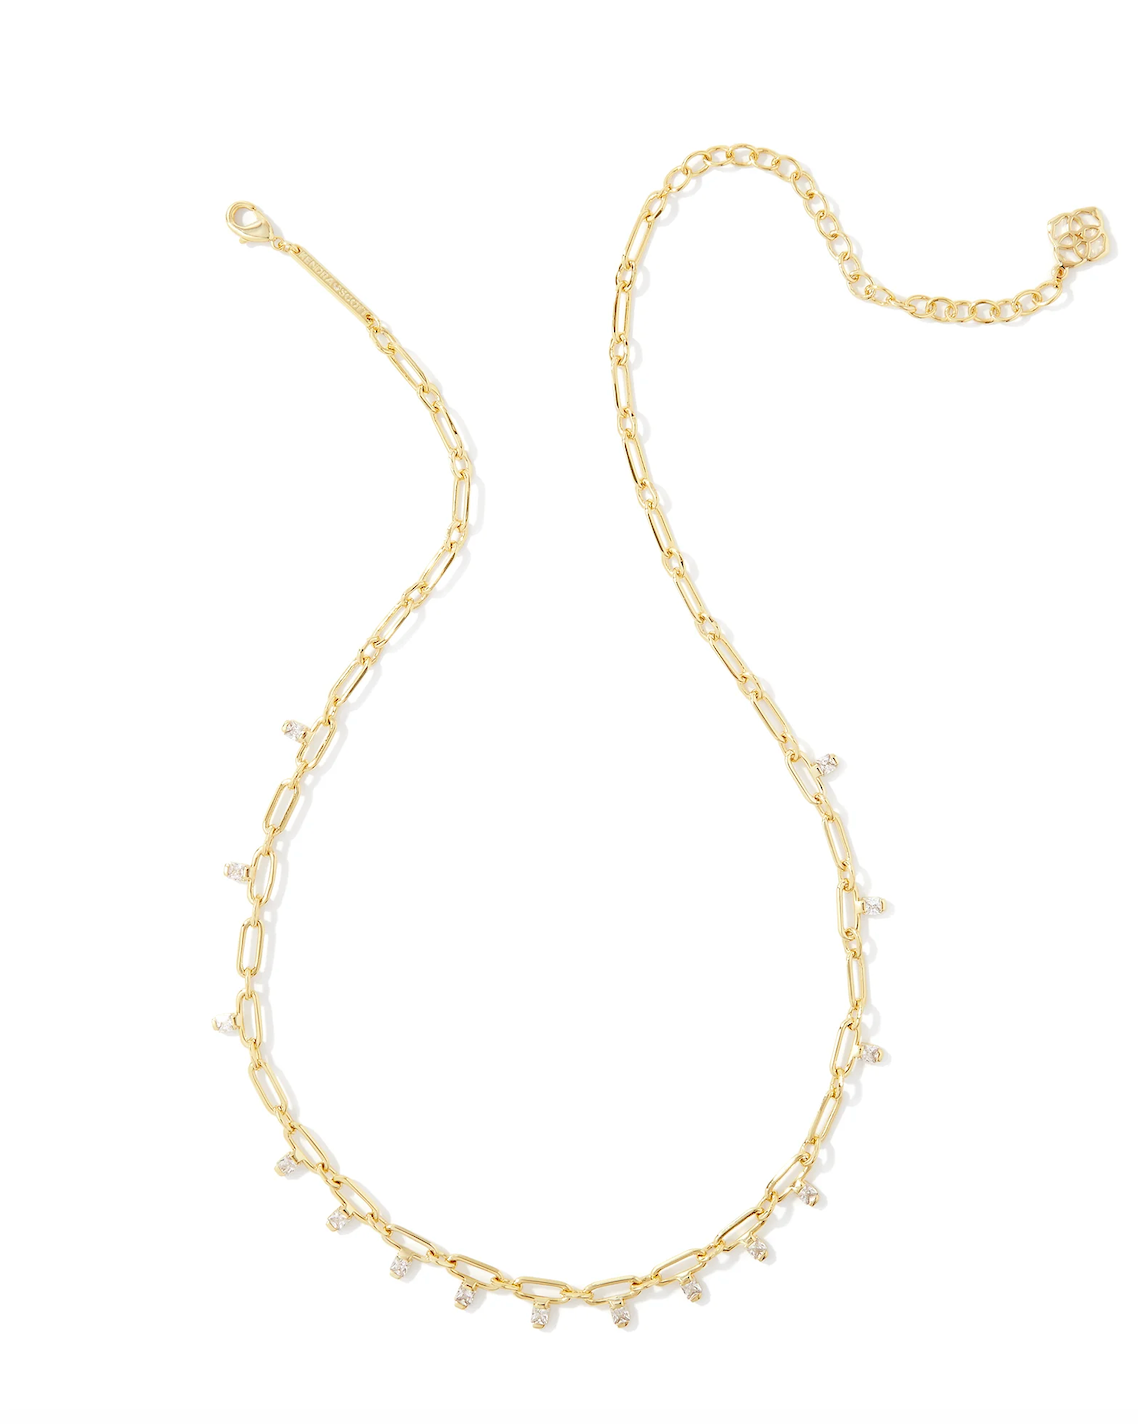 Kendra Scott Juliette Pendant Necklace in White Crystal, Rhodium-Plated |  REEDS Jewelers